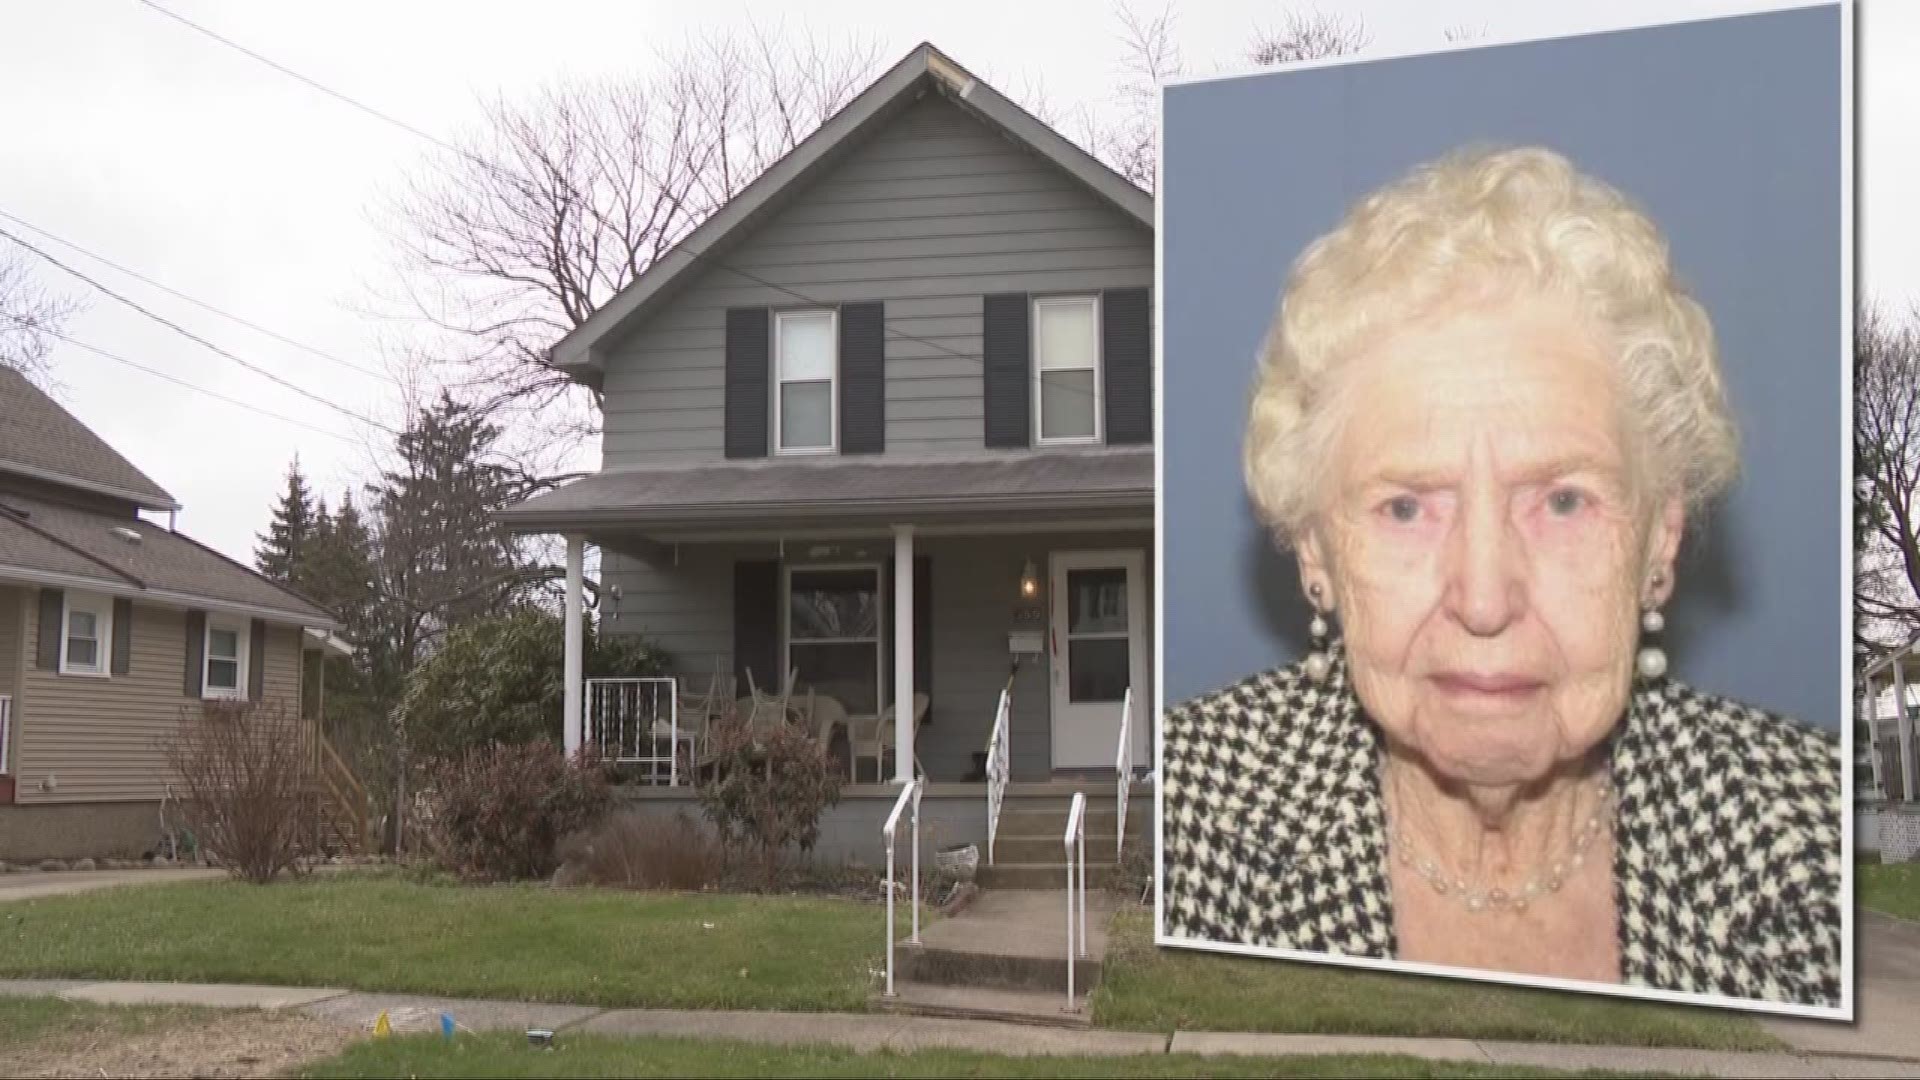 17-year-old accused of killing a 98-year-old woman appeared in court Wednesday